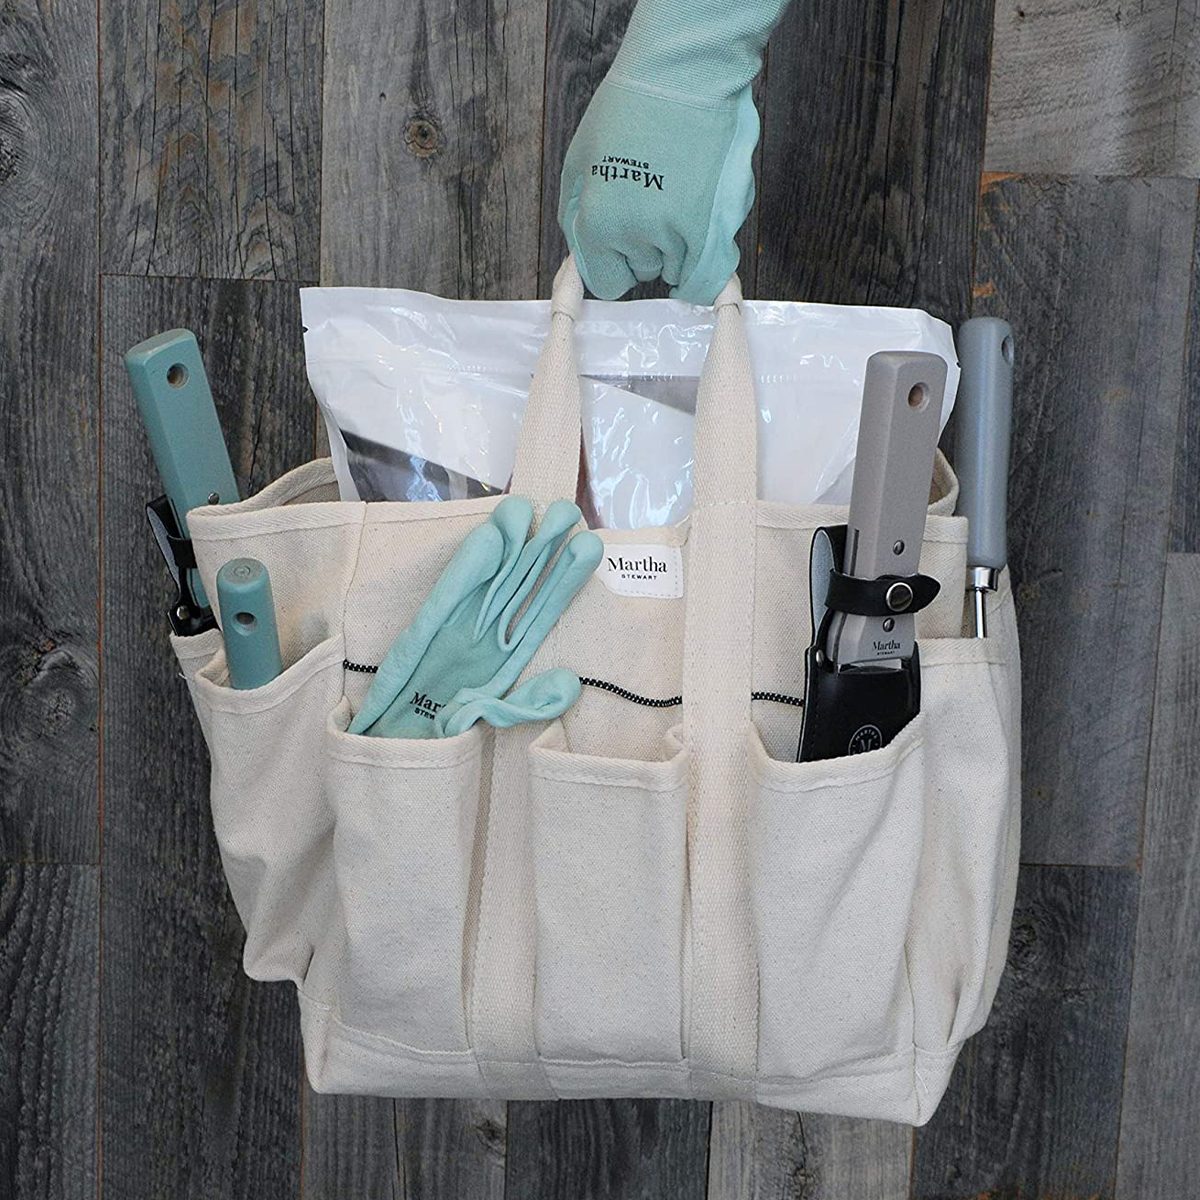 9 Garden Tool Bags to Keep Planting Essentials Organized and Ready to Use